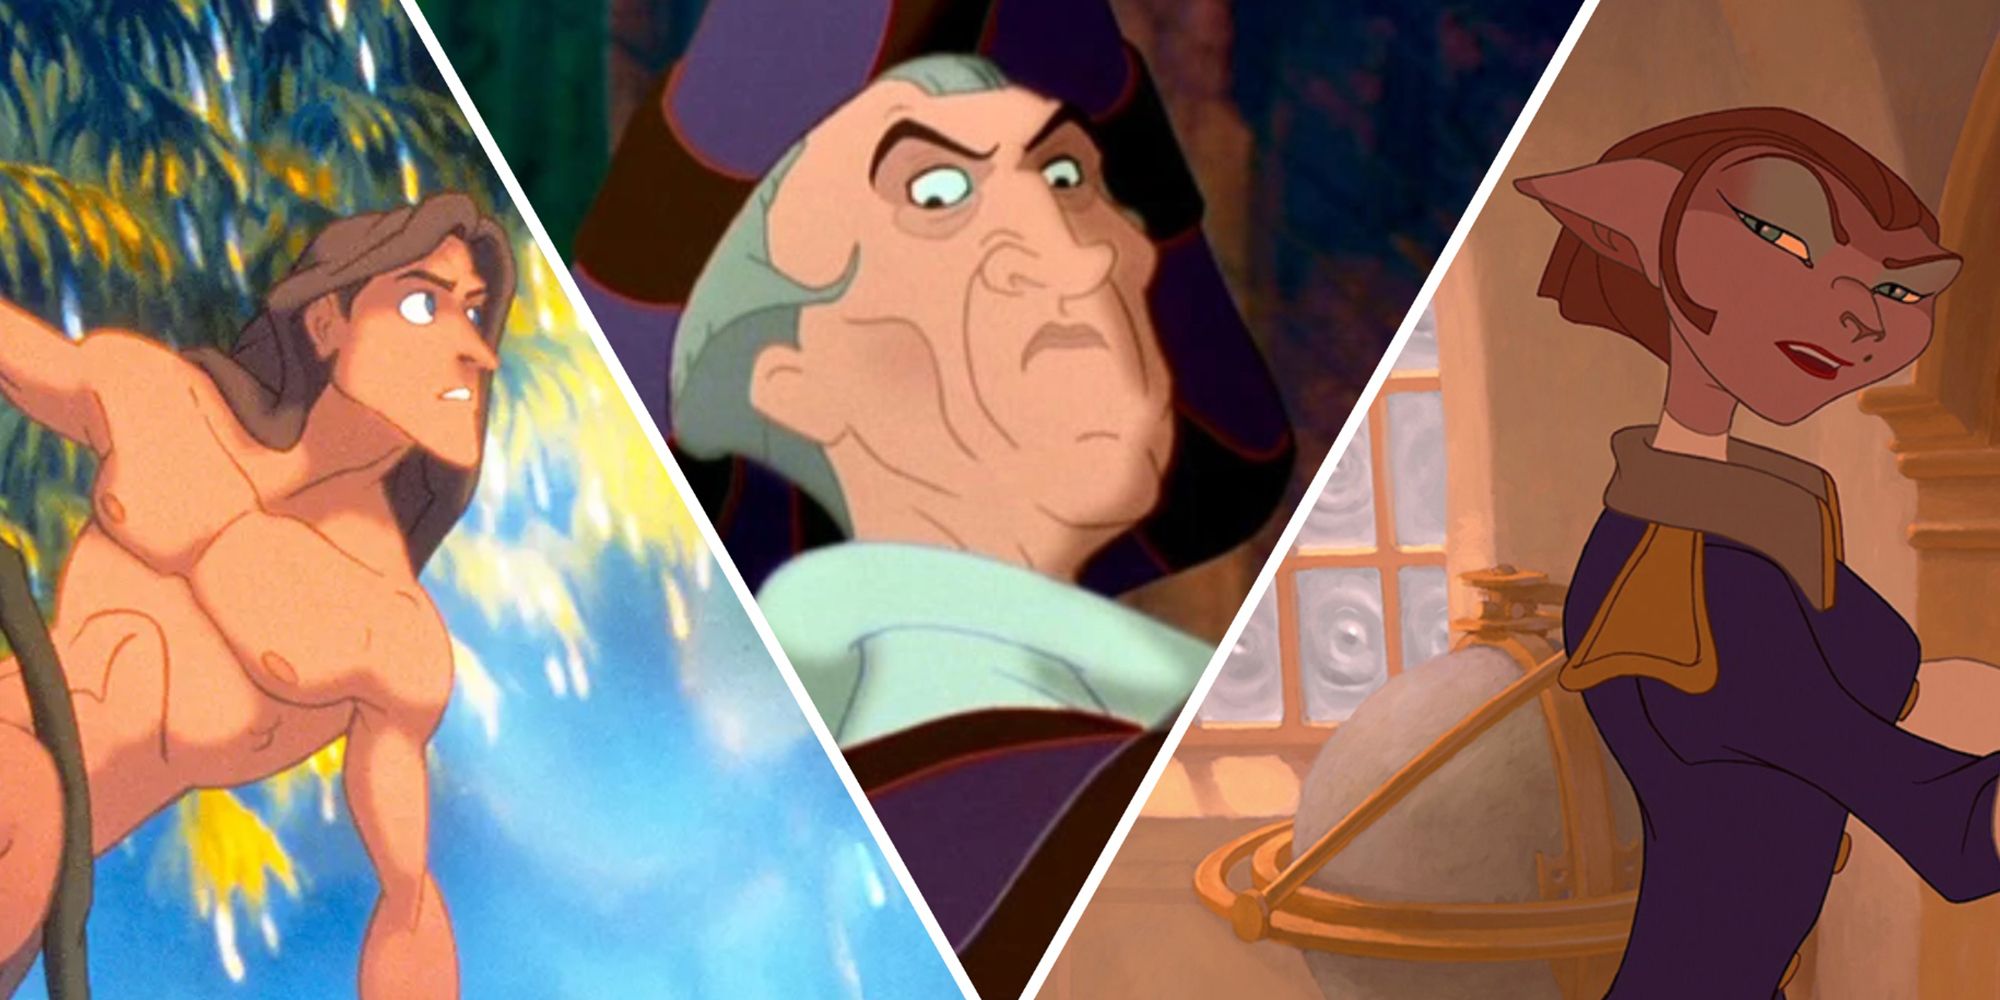 Left to right, Tarzan, Frollo from the Hunchback of Notre Dame, and Captain Amelia from Treasure Planet are pictured.